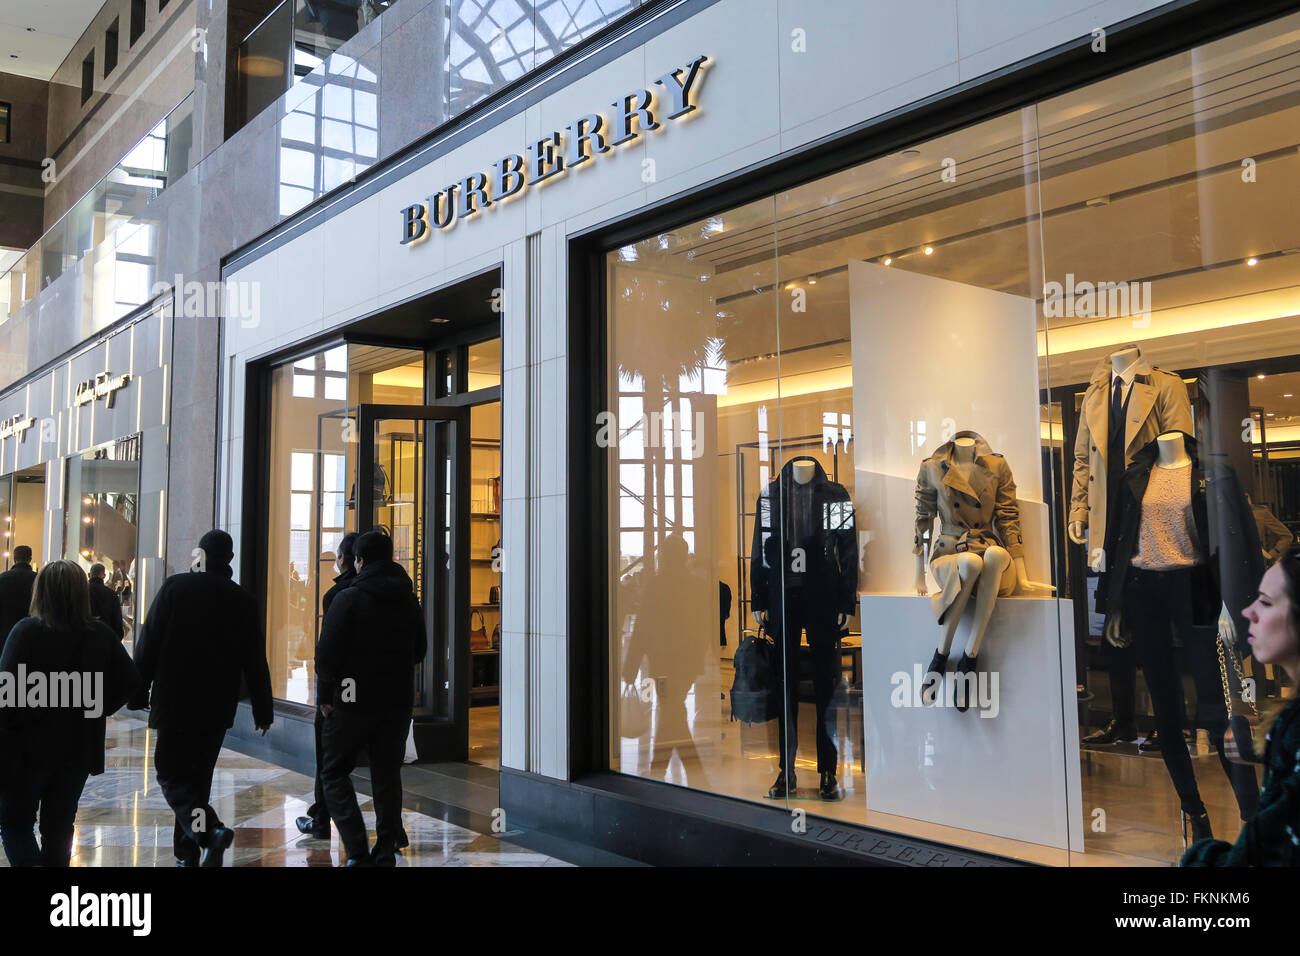 burberry us store